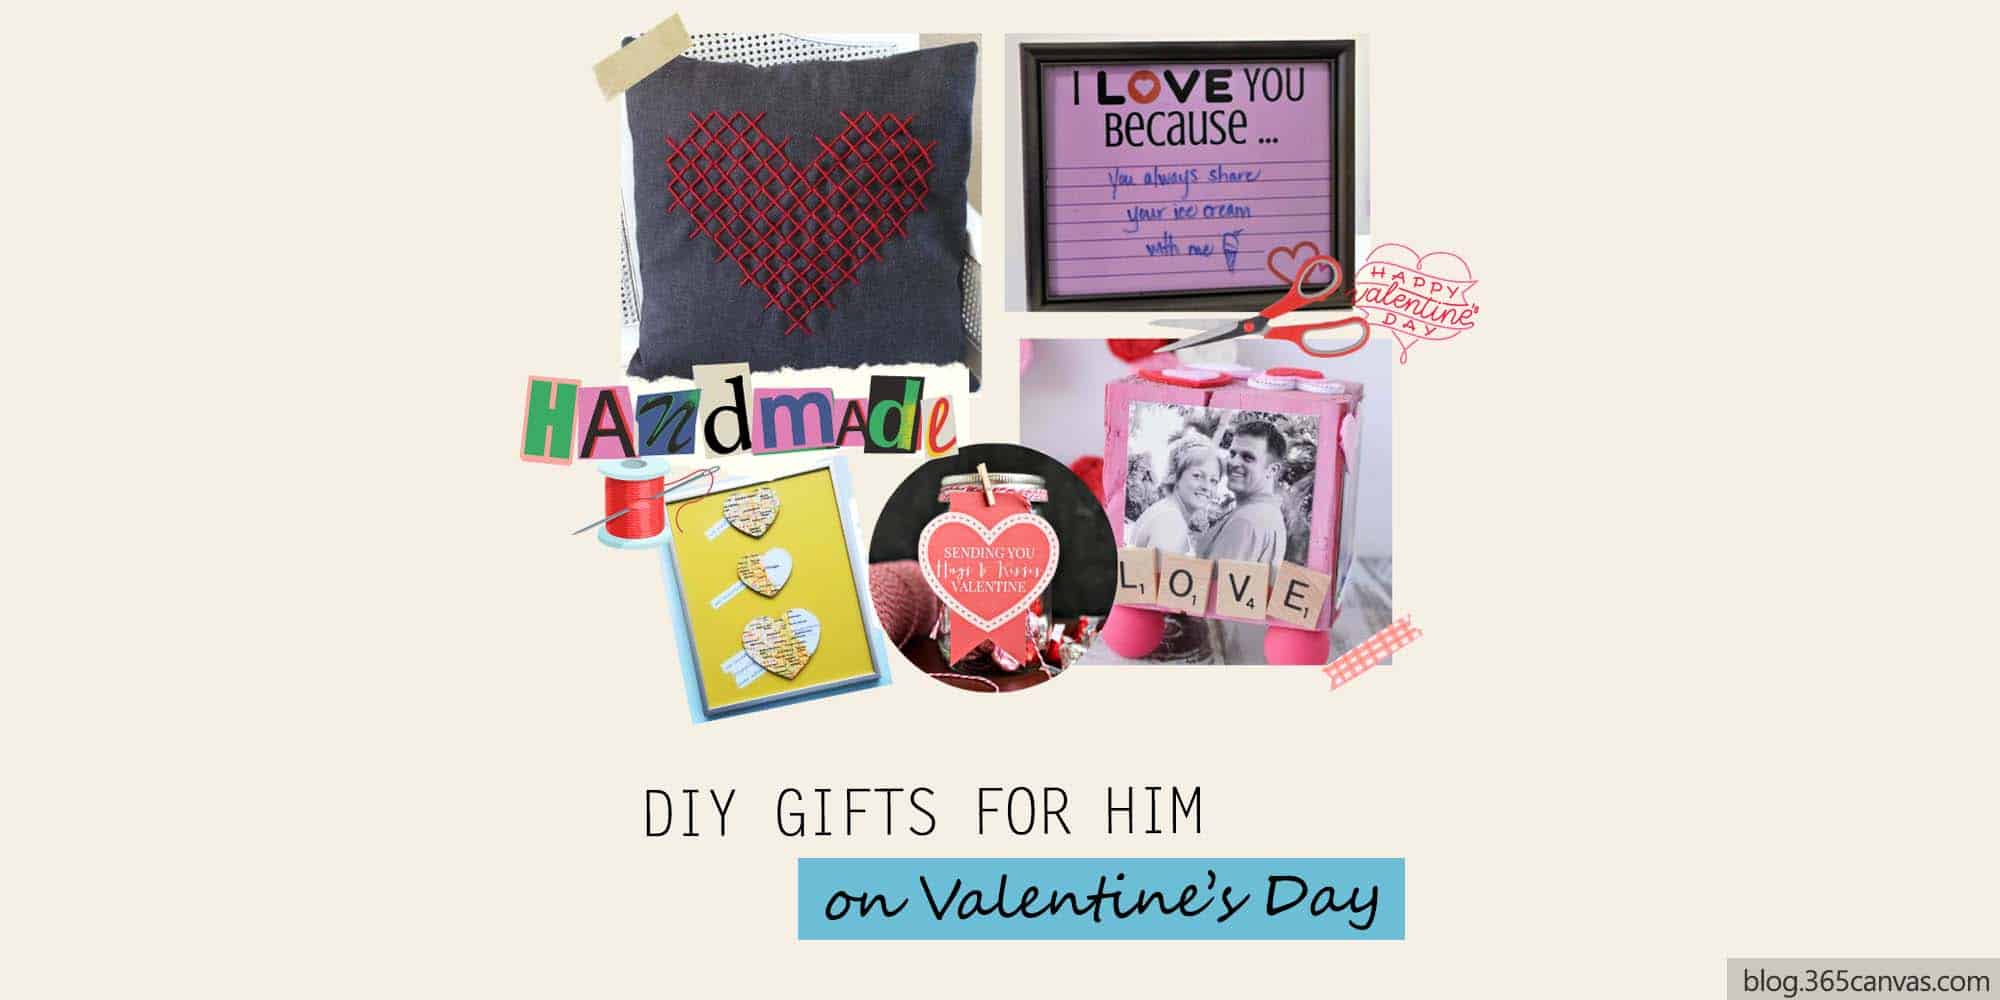 Personalised Valentine's Day gifts for him | YourSurprise